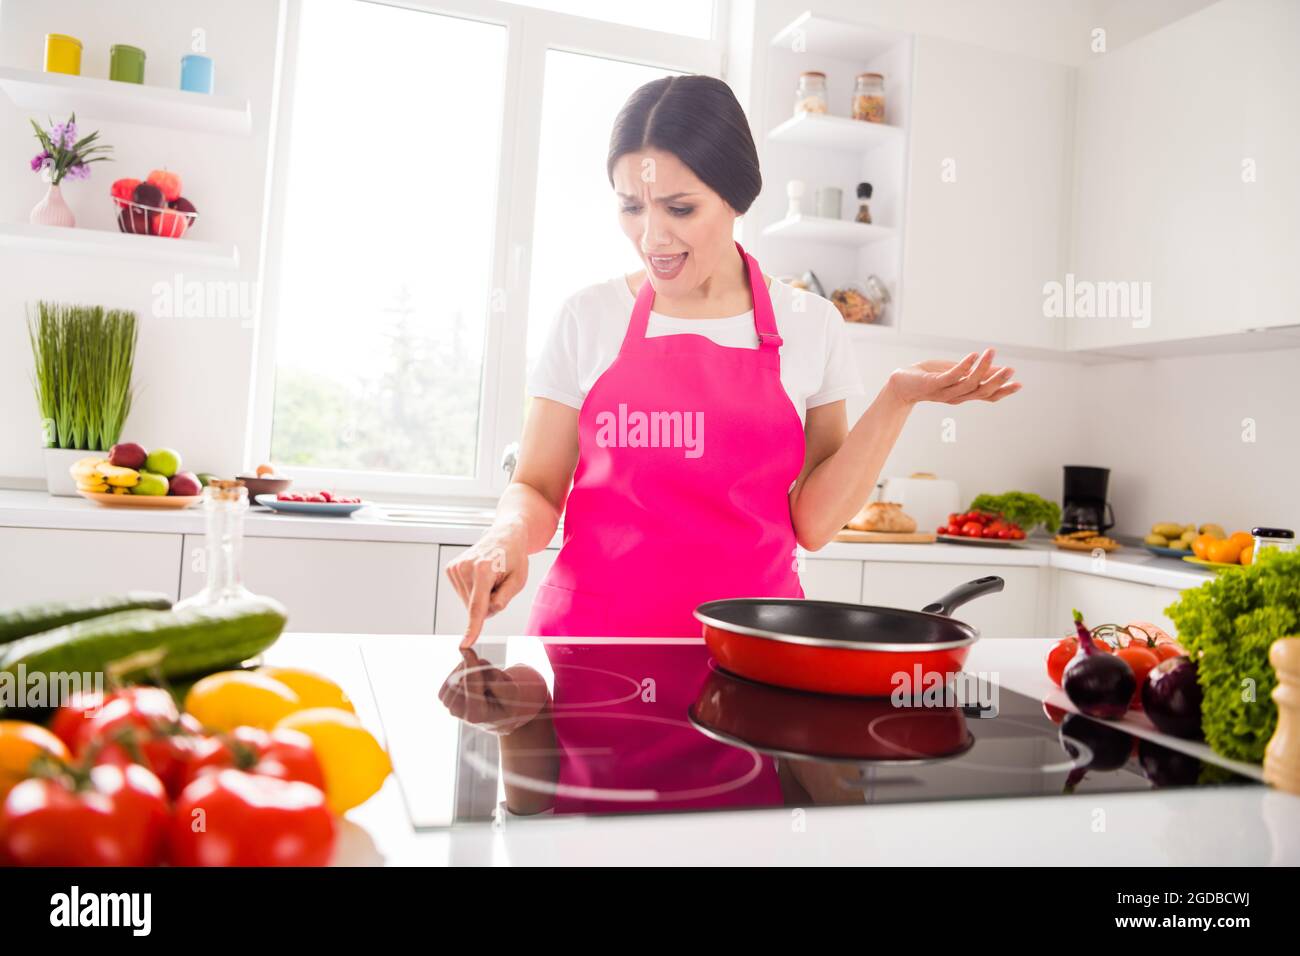 https://c8.alamy.com/comp/2GDBCWJ/photo-of-unhappy-upset-mature-woman-dressed-pink-apron-cooking-luck-dislike-dirty-stove-indoors-house-home-room-2GDBCWJ.jpg